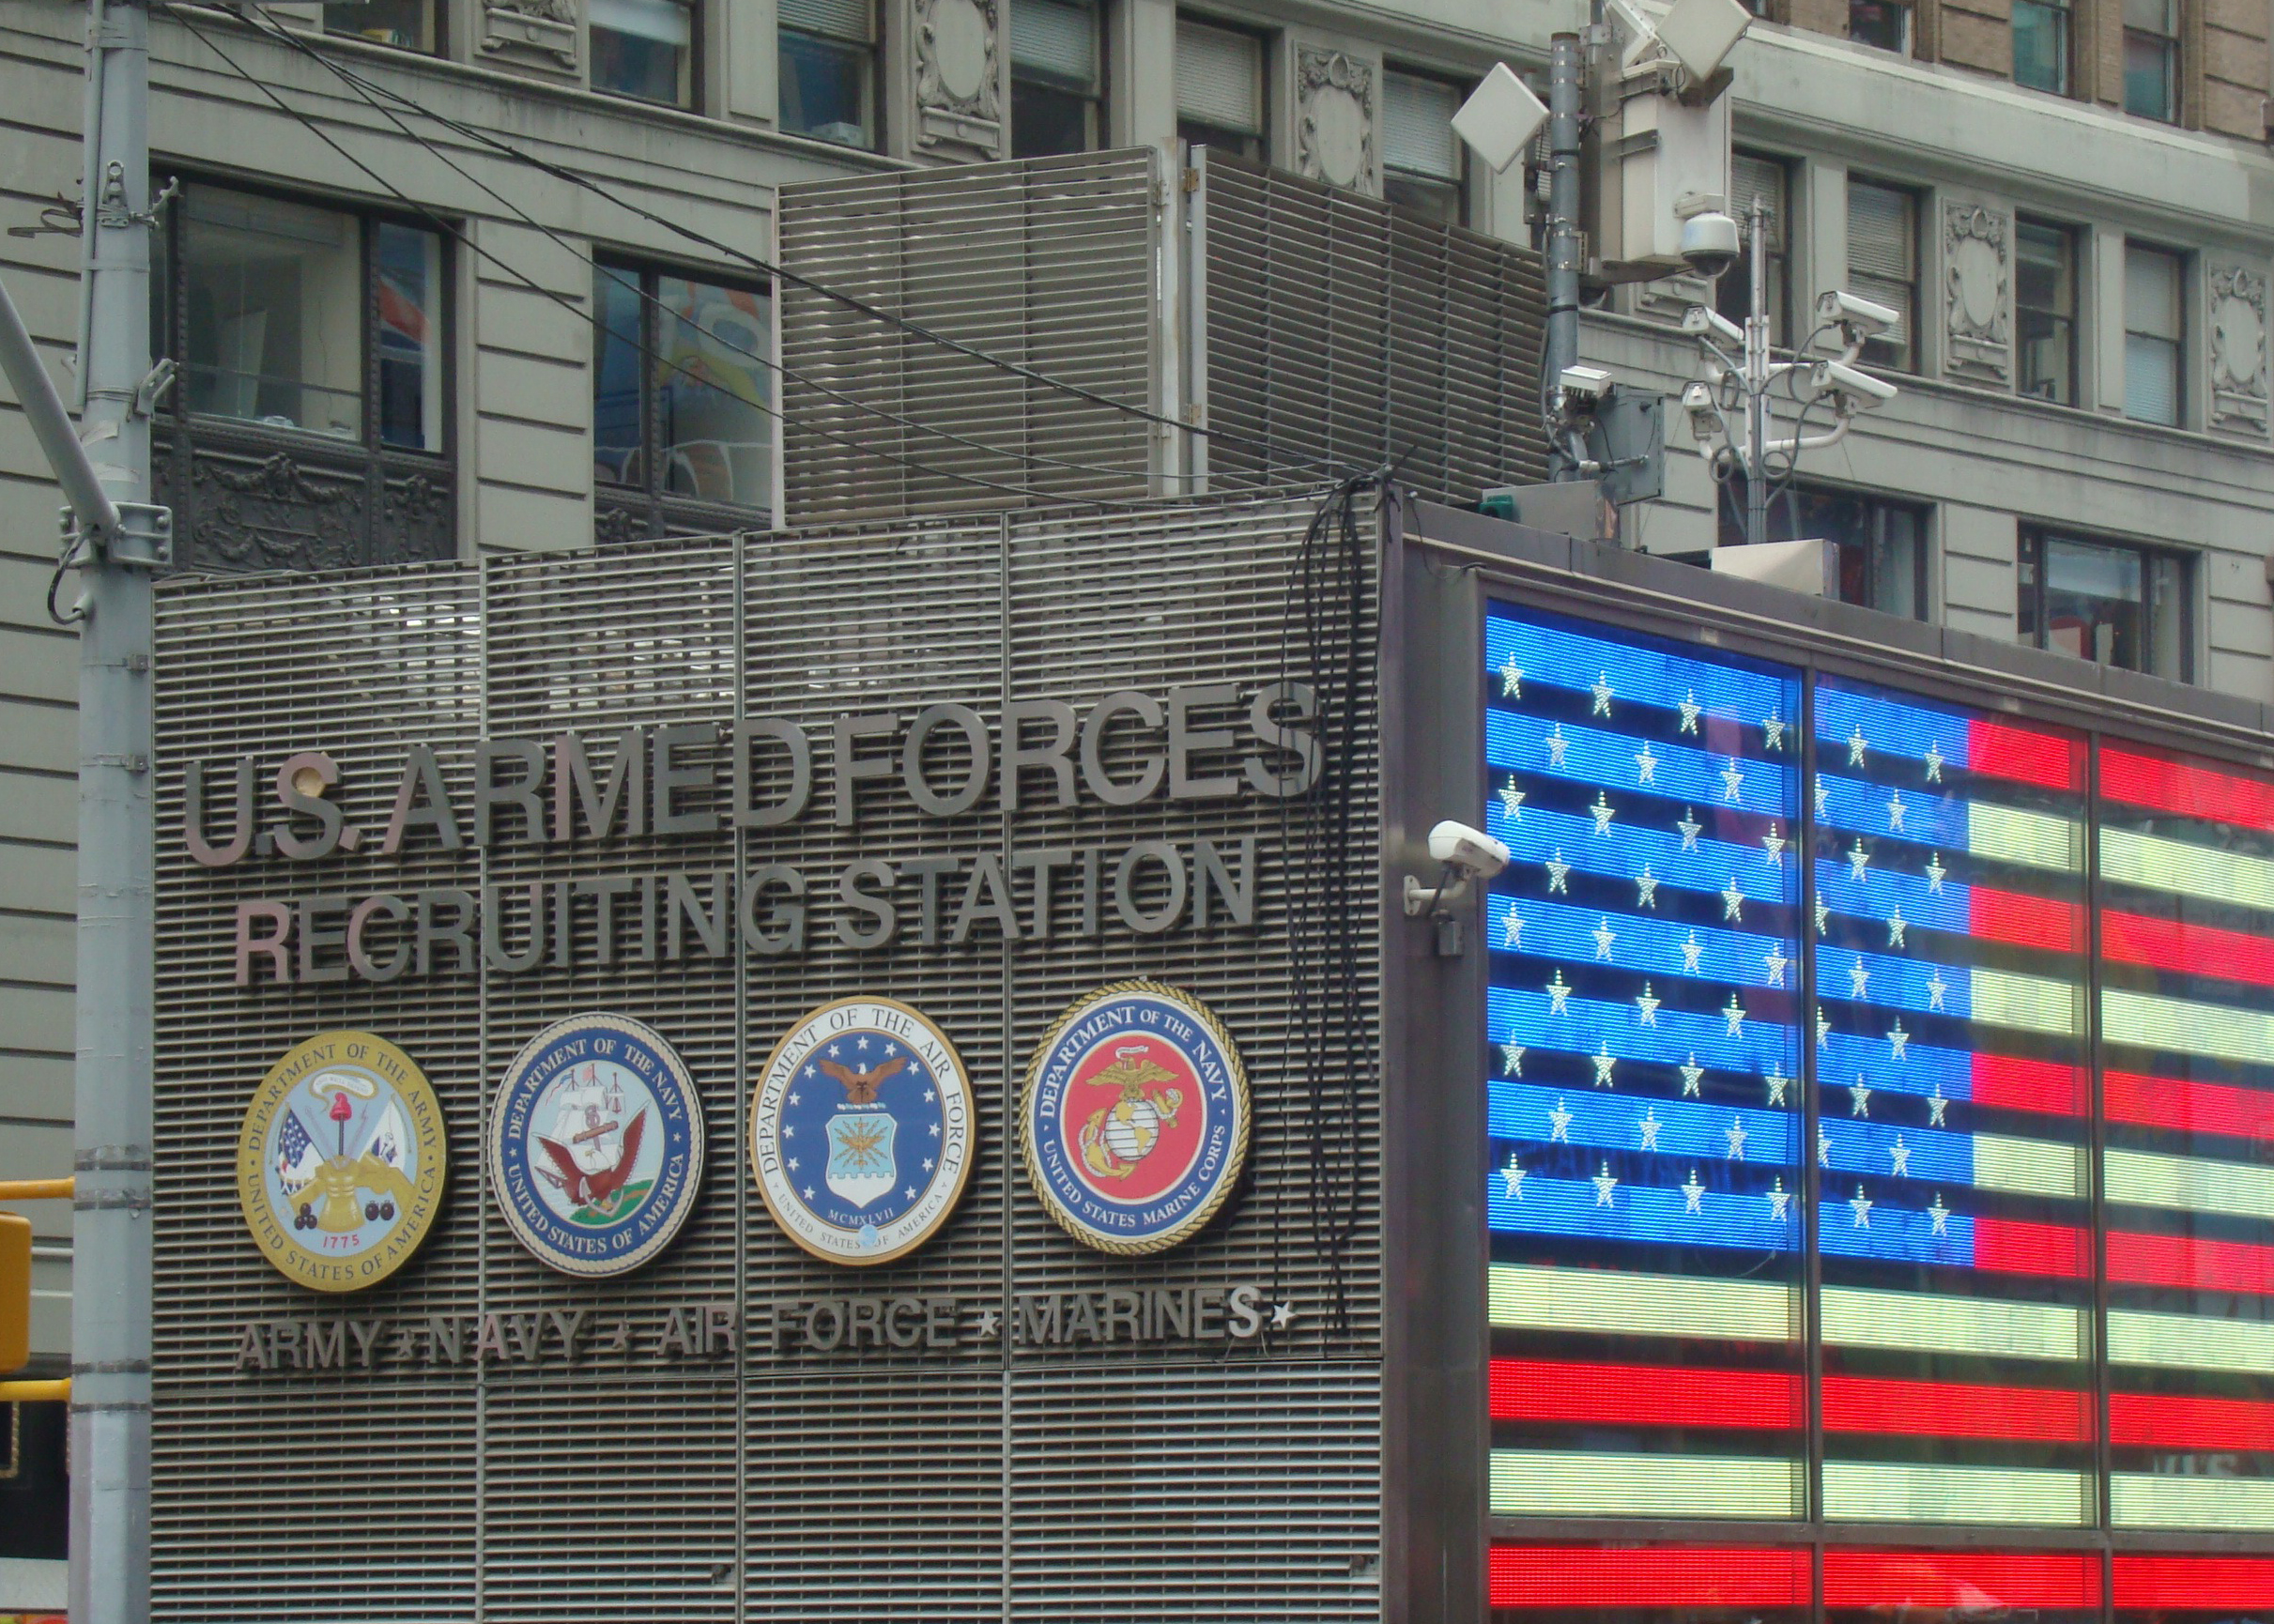 US Armed Forces Recruiting Station